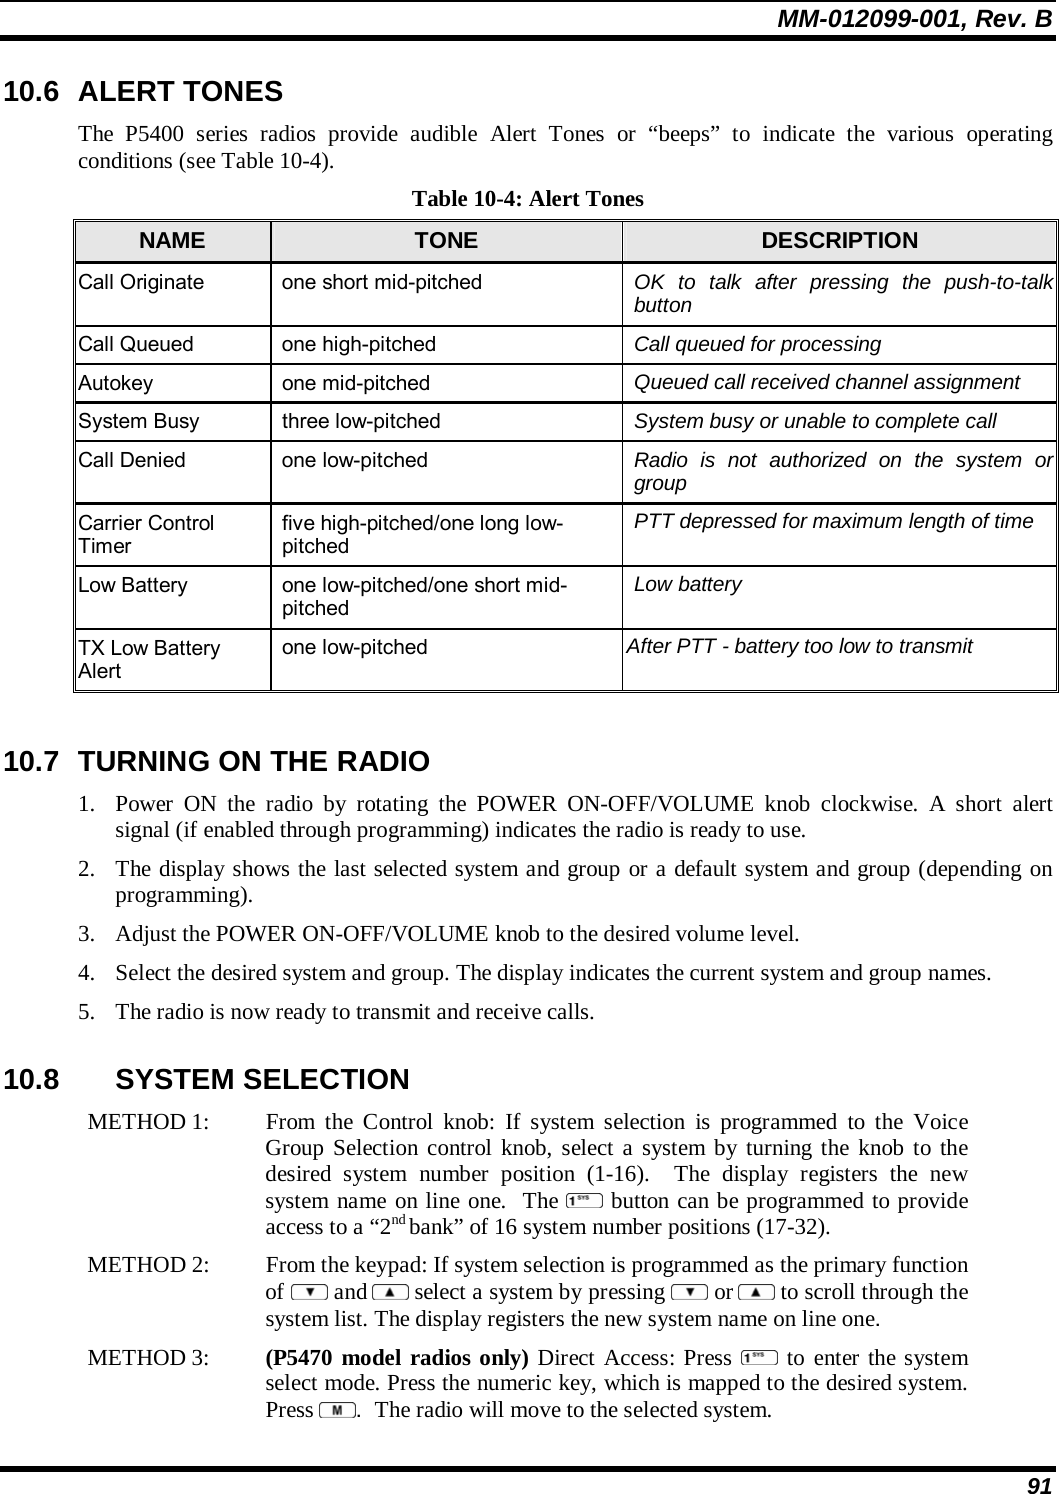 MM-012099-001, Rev. B 91 10.6 ALERT TONES The P5400 series radios provide audible Alert Tones or “beeps” to indicate the various operating conditions (see Table 10-4). Table 10-4: Alert Tones NAME  TONE  DESCRIPTION Call Originate  one short mid-pitched  OK to talk after pressing the push-to-talk button Call Queued  one high-pitched  Call queued for processing Autokey one mid-pitched  Queued call received channel assignment System Busy  three low-pitched  System busy or unable to complete call Call Denied  one low-pitched  Radio is not authorized on the system or group Carrier Control Timer five high-pitched/one long low-pitched PTT depressed for maximum length of time Low Battery  one low-pitched/one short mid-pitched Low battery TX Low Battery Alert one low-pitched  After PTT - battery too low to transmit  10.7  TURNING ON THE RADIO 1. Power ON the radio by rotating the POWER ON-OFF/VOLUME knob clockwise. A short alert signal (if enabled through programming) indicates the radio is ready to use.  2. The display shows the last selected system and group or a default system and group (depending on programming).  3. Adjust the POWER ON-OFF/VOLUME knob to the desired volume level.  4. Select the desired system and group. The display indicates the current system and group names.  5. The radio is now ready to transmit and receive calls. 10.8 SYSTEM SELECTION METHOD 1:   From the Control knob: If system selection is programmed to the Voice Group Selection control knob, select a system by turning the knob to thedesired system number position (1-16).  The display registers the new system name on line one.  The  button can be programmed to provide access to a “2nd bank” of 16 system number positions (17-32). METHOD 2:   From the keypad: If system selection is programmed as the primary function of  and  select a system by pressing   or  to scroll through the system list. The display registers the new system name on line one.  METHOD 3:   (P5470 model radios only) Direct Access: Press  to enter the system select mode. Press the numeric key, which is mapped to the desired system.Press  .  The radio will move to the selected system.  